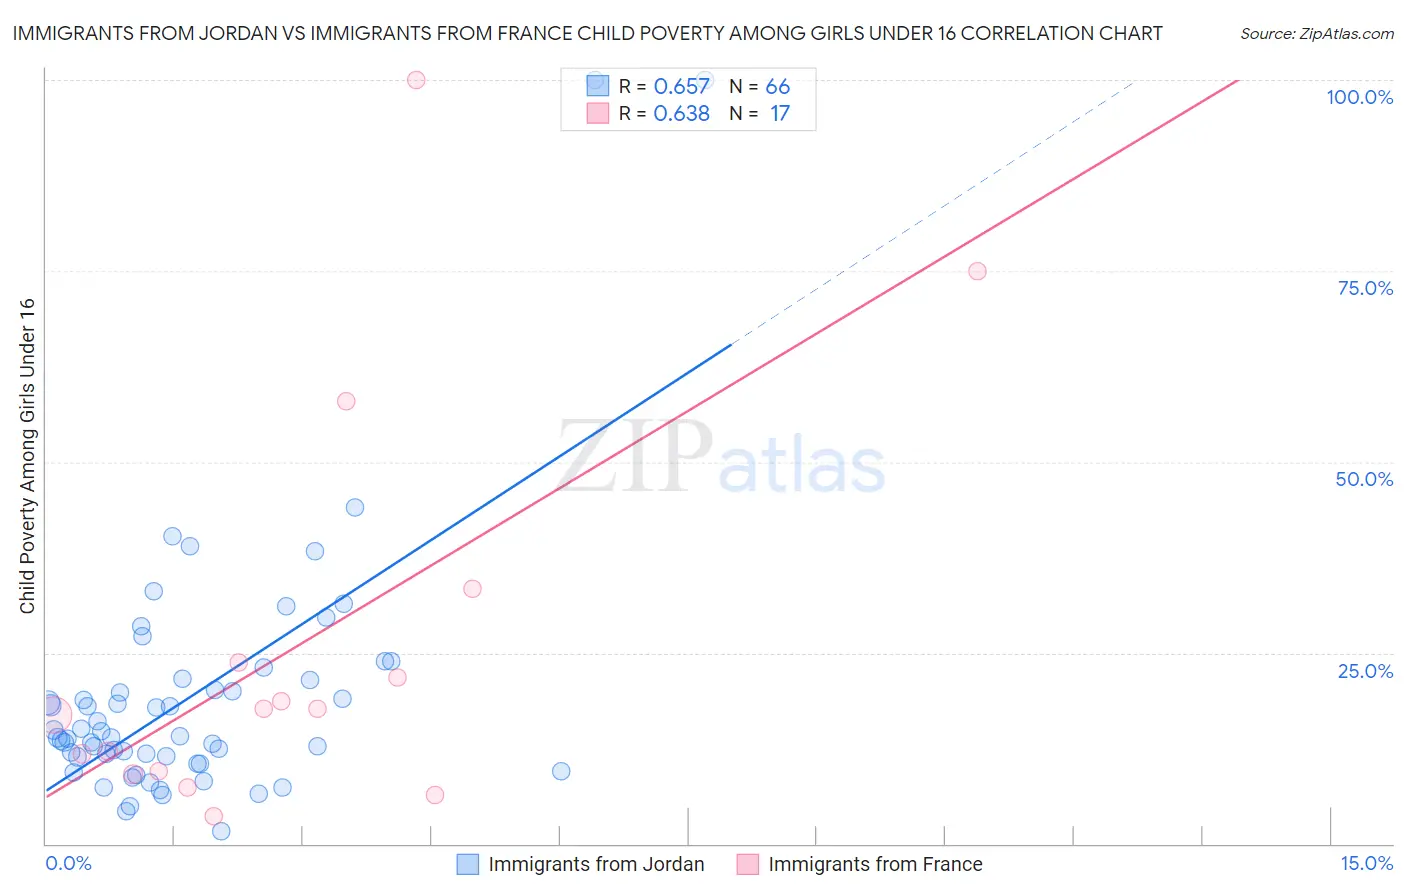 Immigrants from Jordan vs Immigrants from France Child Poverty Among Girls Under 16